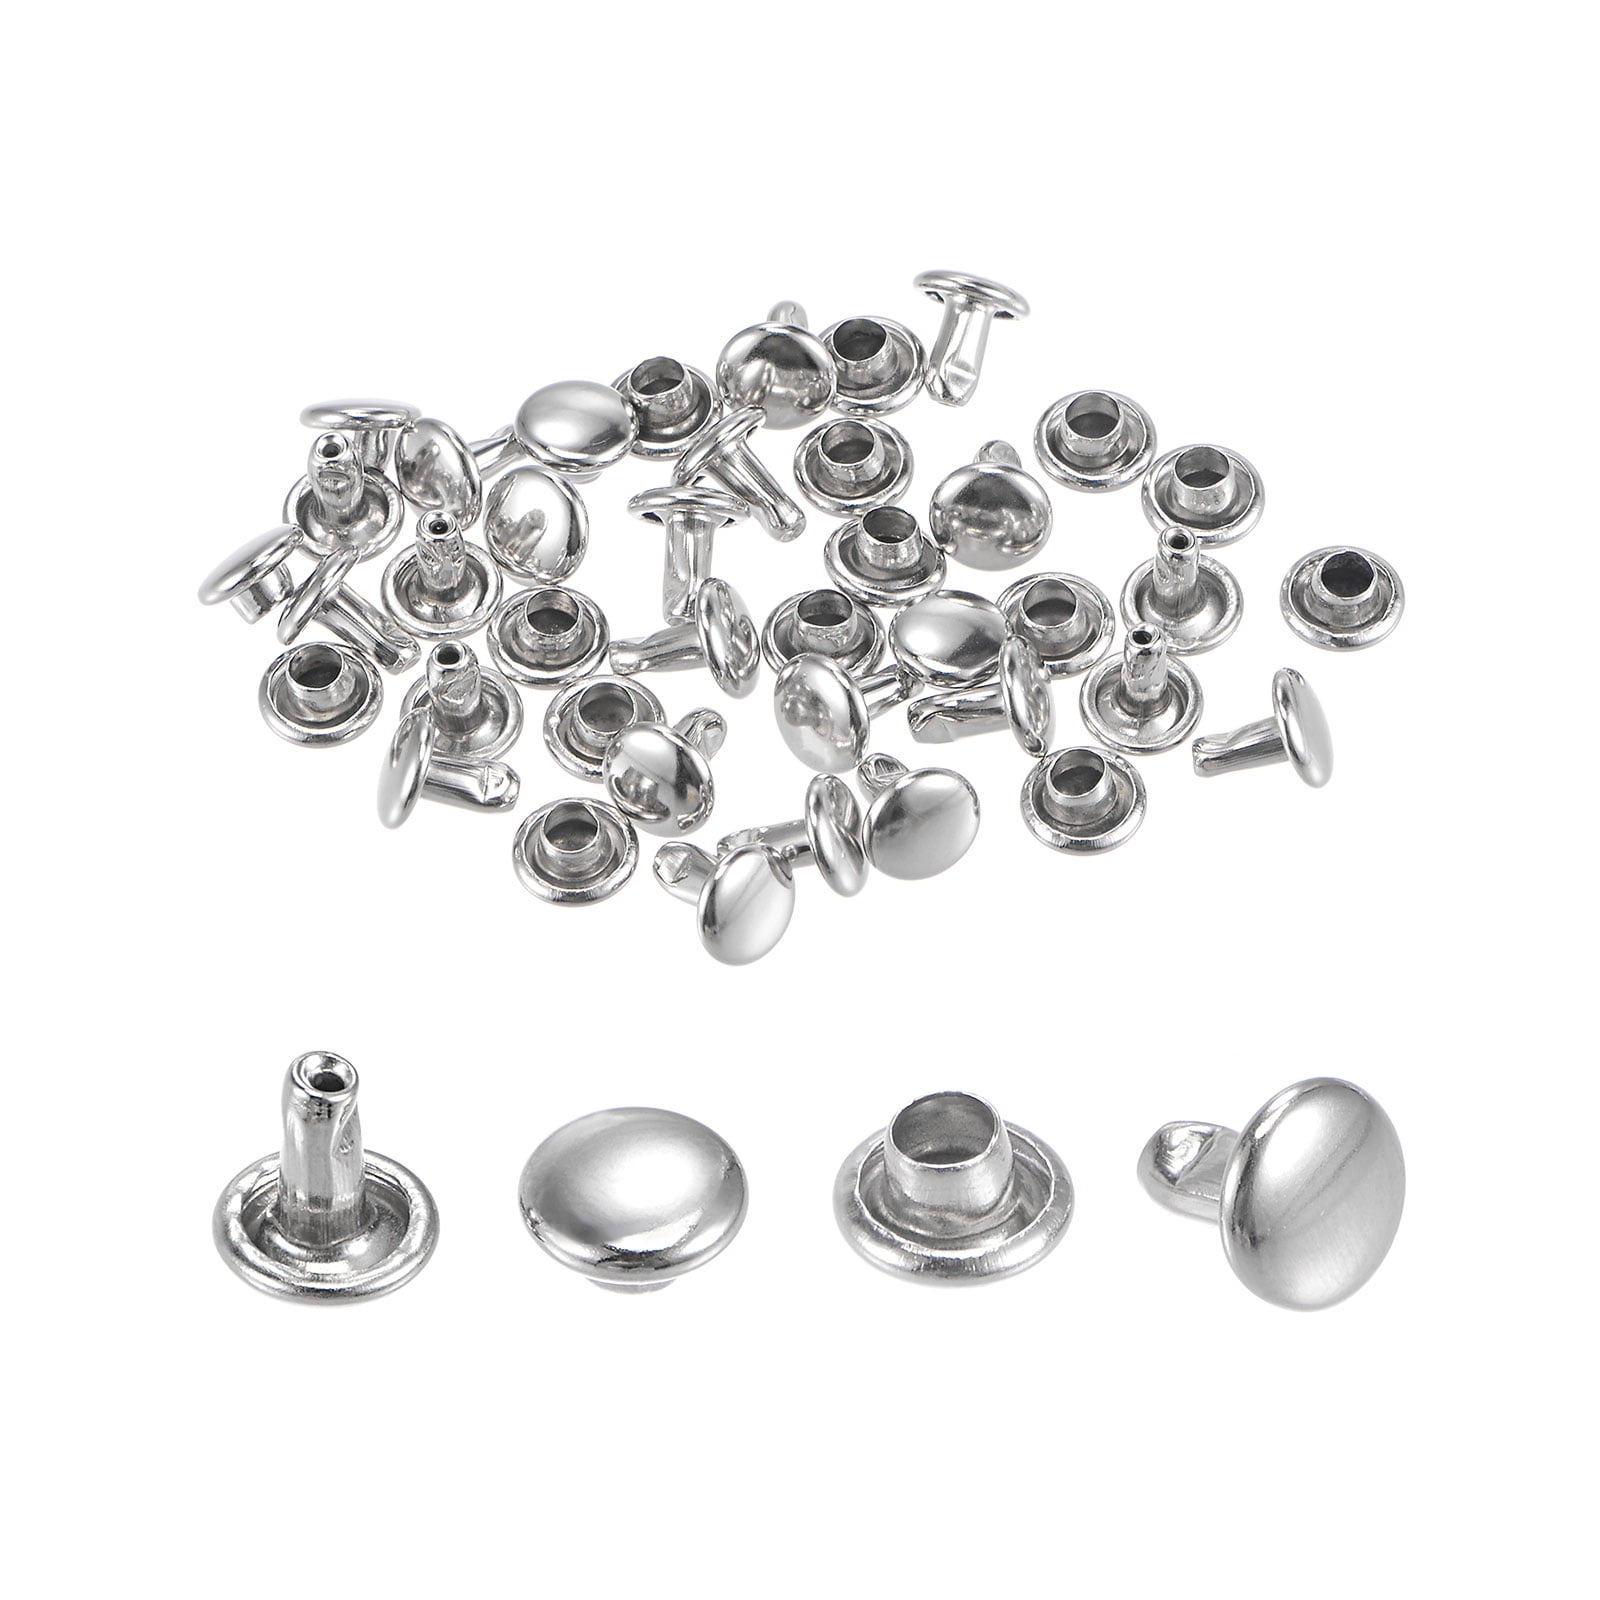 6mm Flat Rings - 1kg Pack - preopened with dome rivets - Ironskin